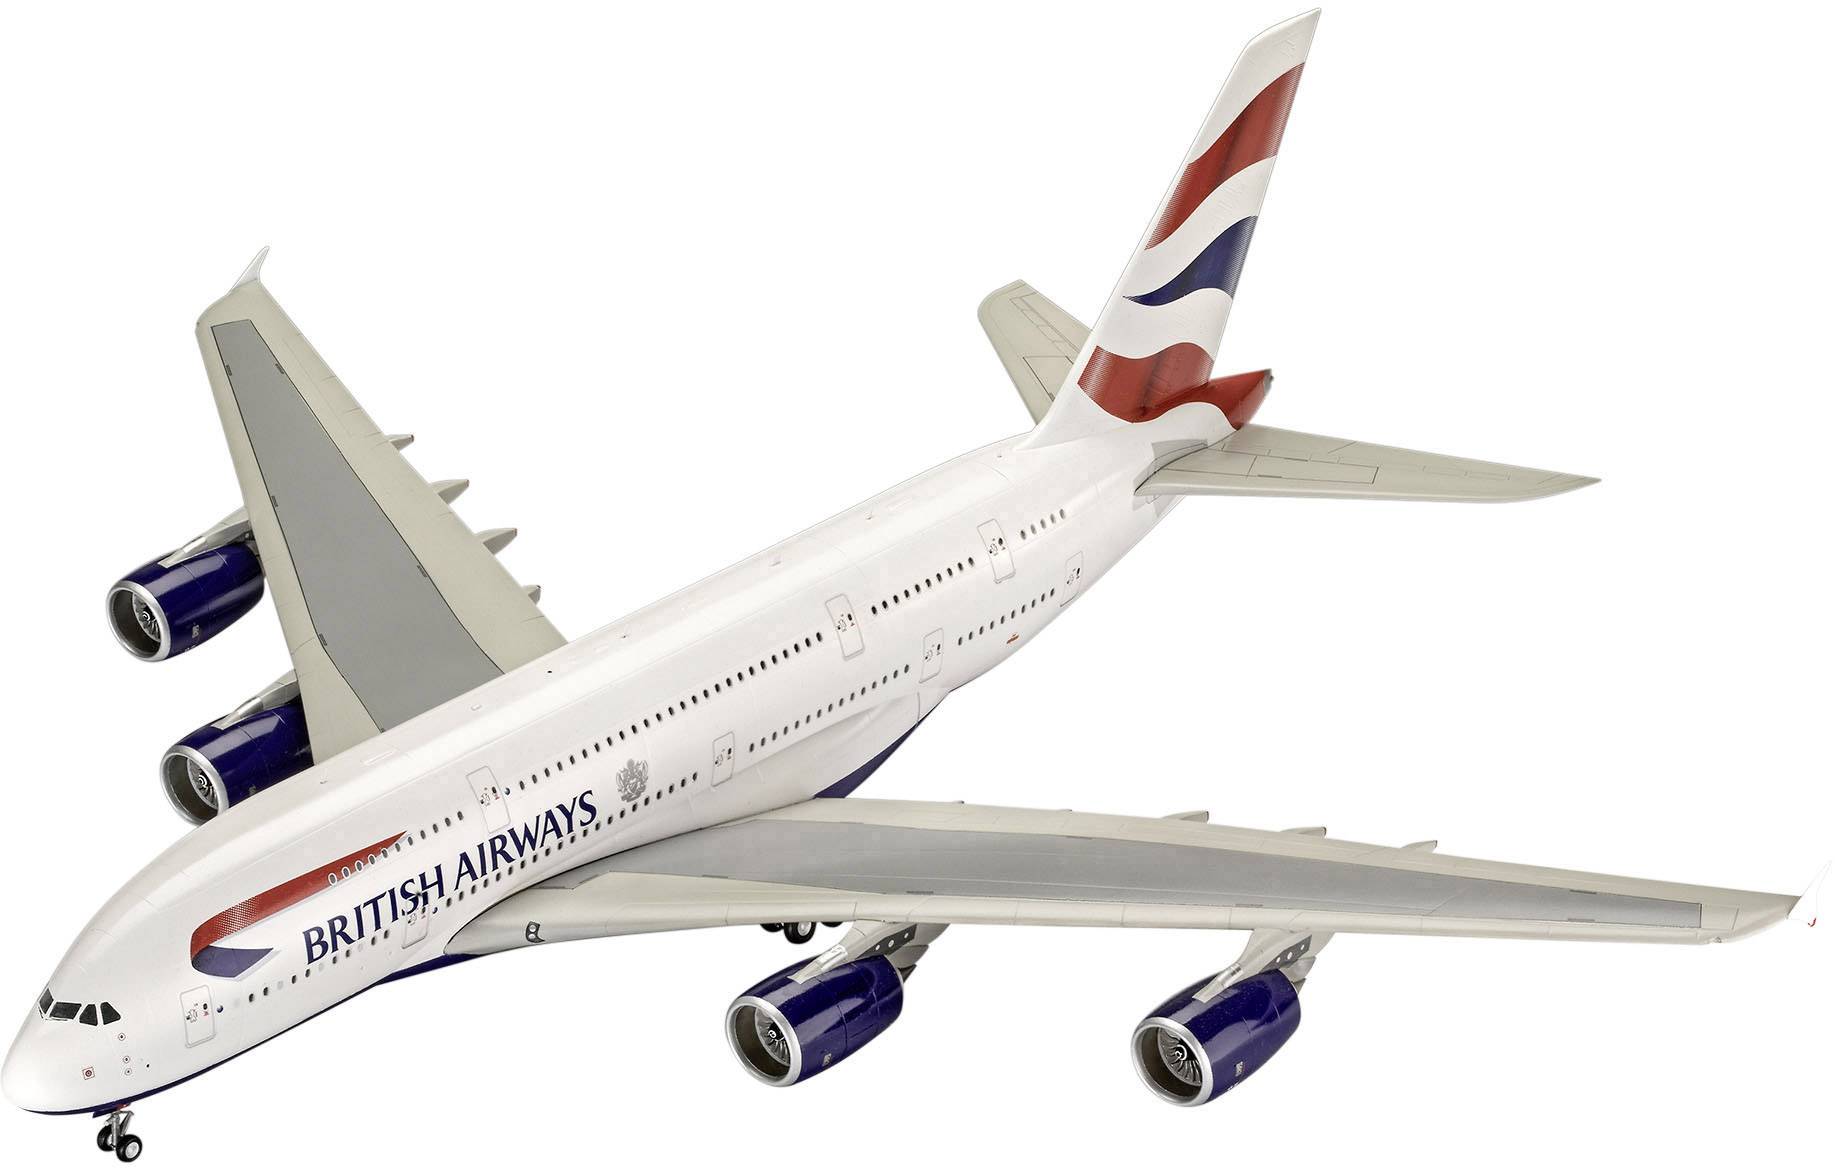 British Airways Airbus A380 Airliner Toy Airplane Diecast with Plastic Parts 